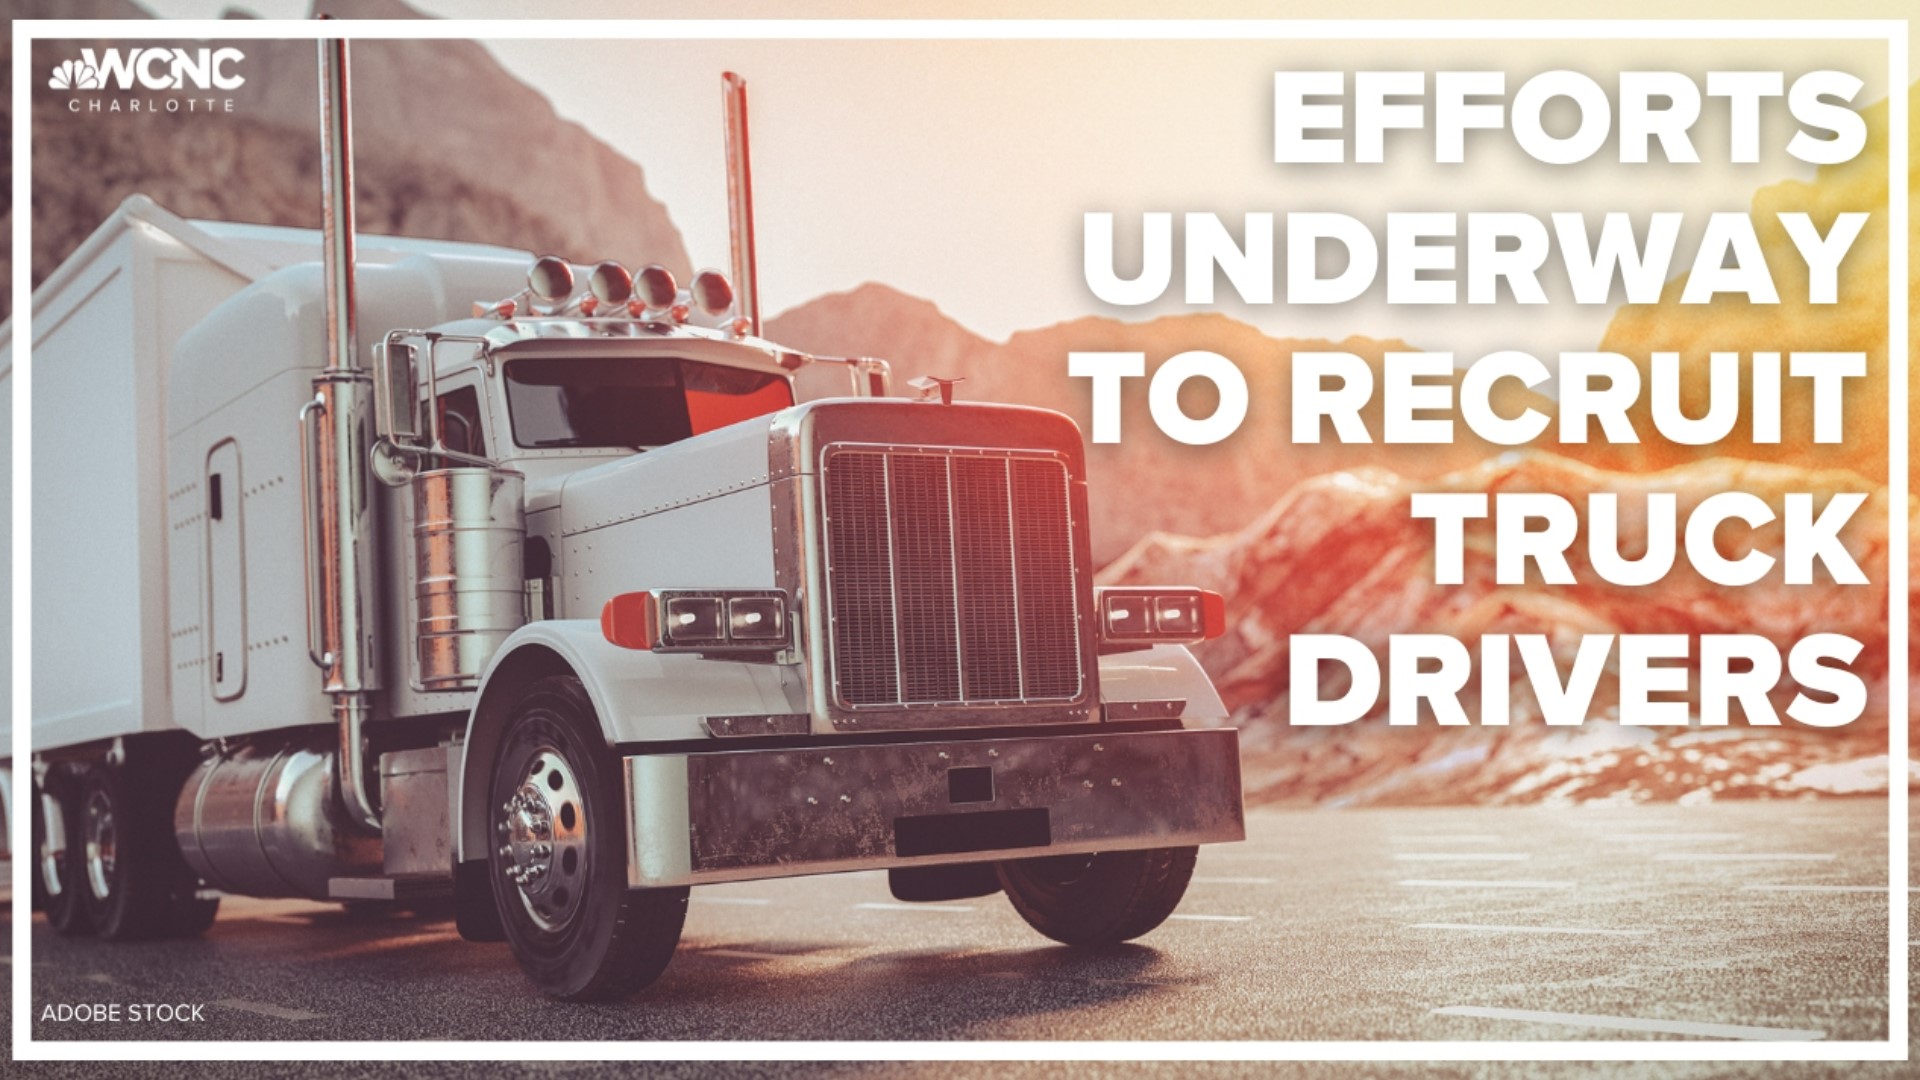 The American Trucking Association said the U.S. needs more than 80,000 drivers, with rising diesel prices and supply chain disruptions impacting the industry.